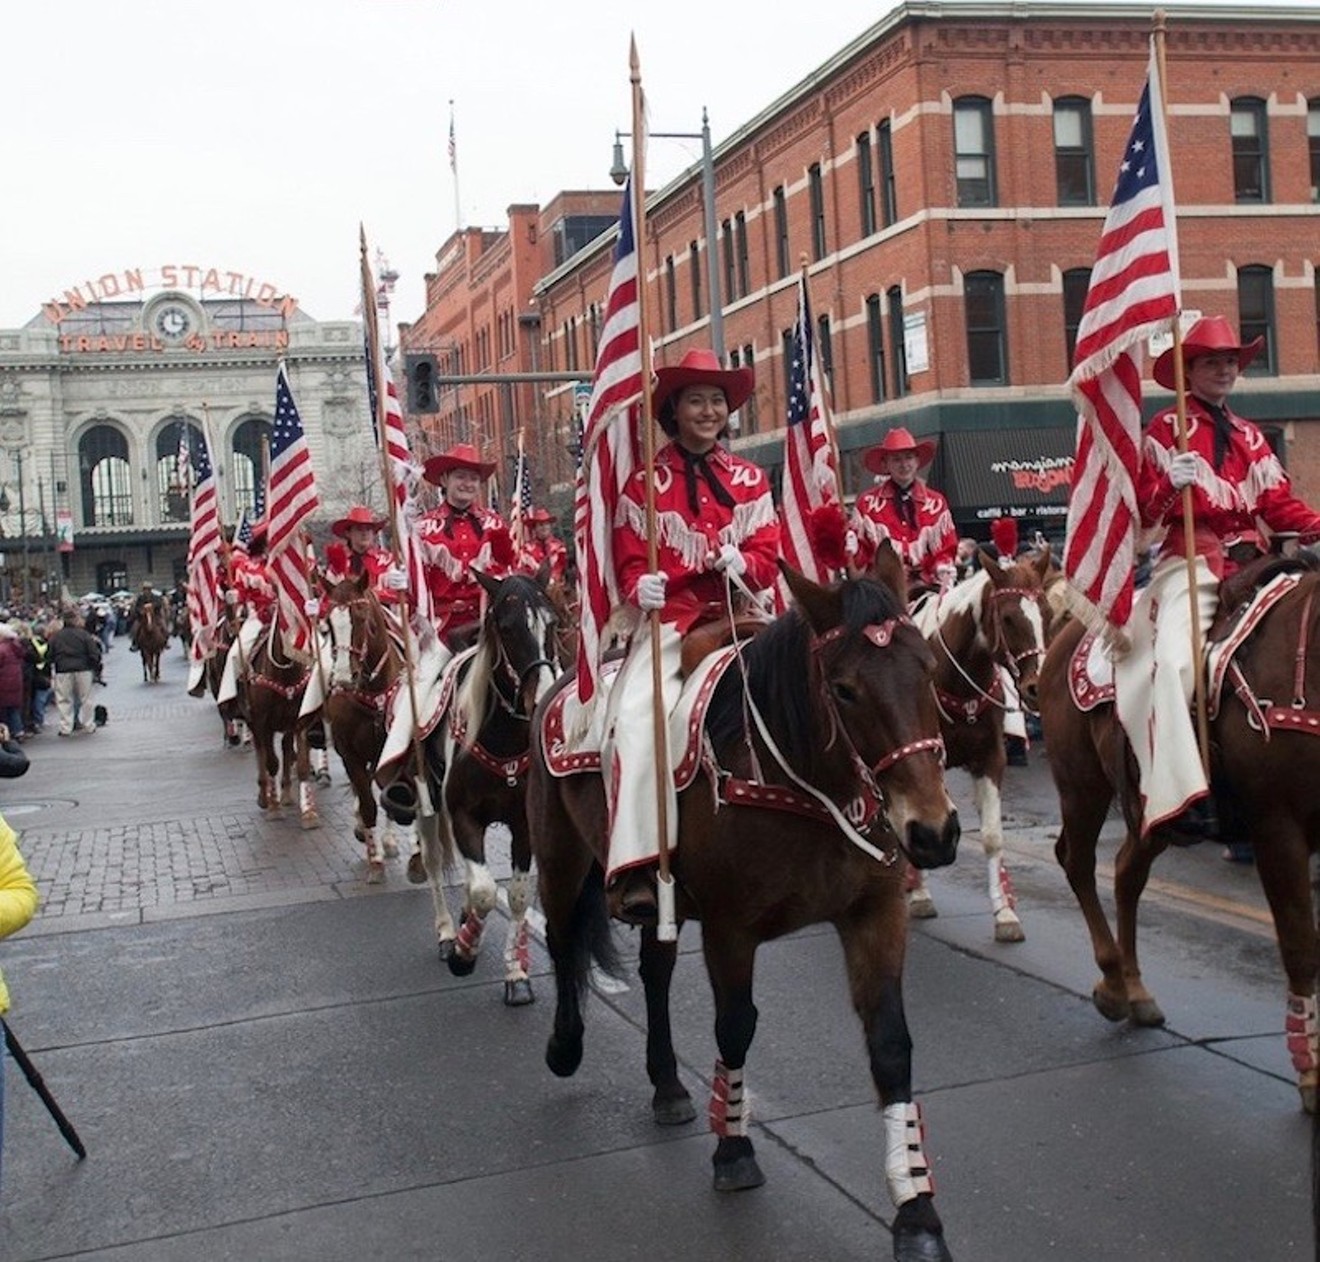 Hooves hit the streets when the Stock Show Parade returns on Thursday, January 10.